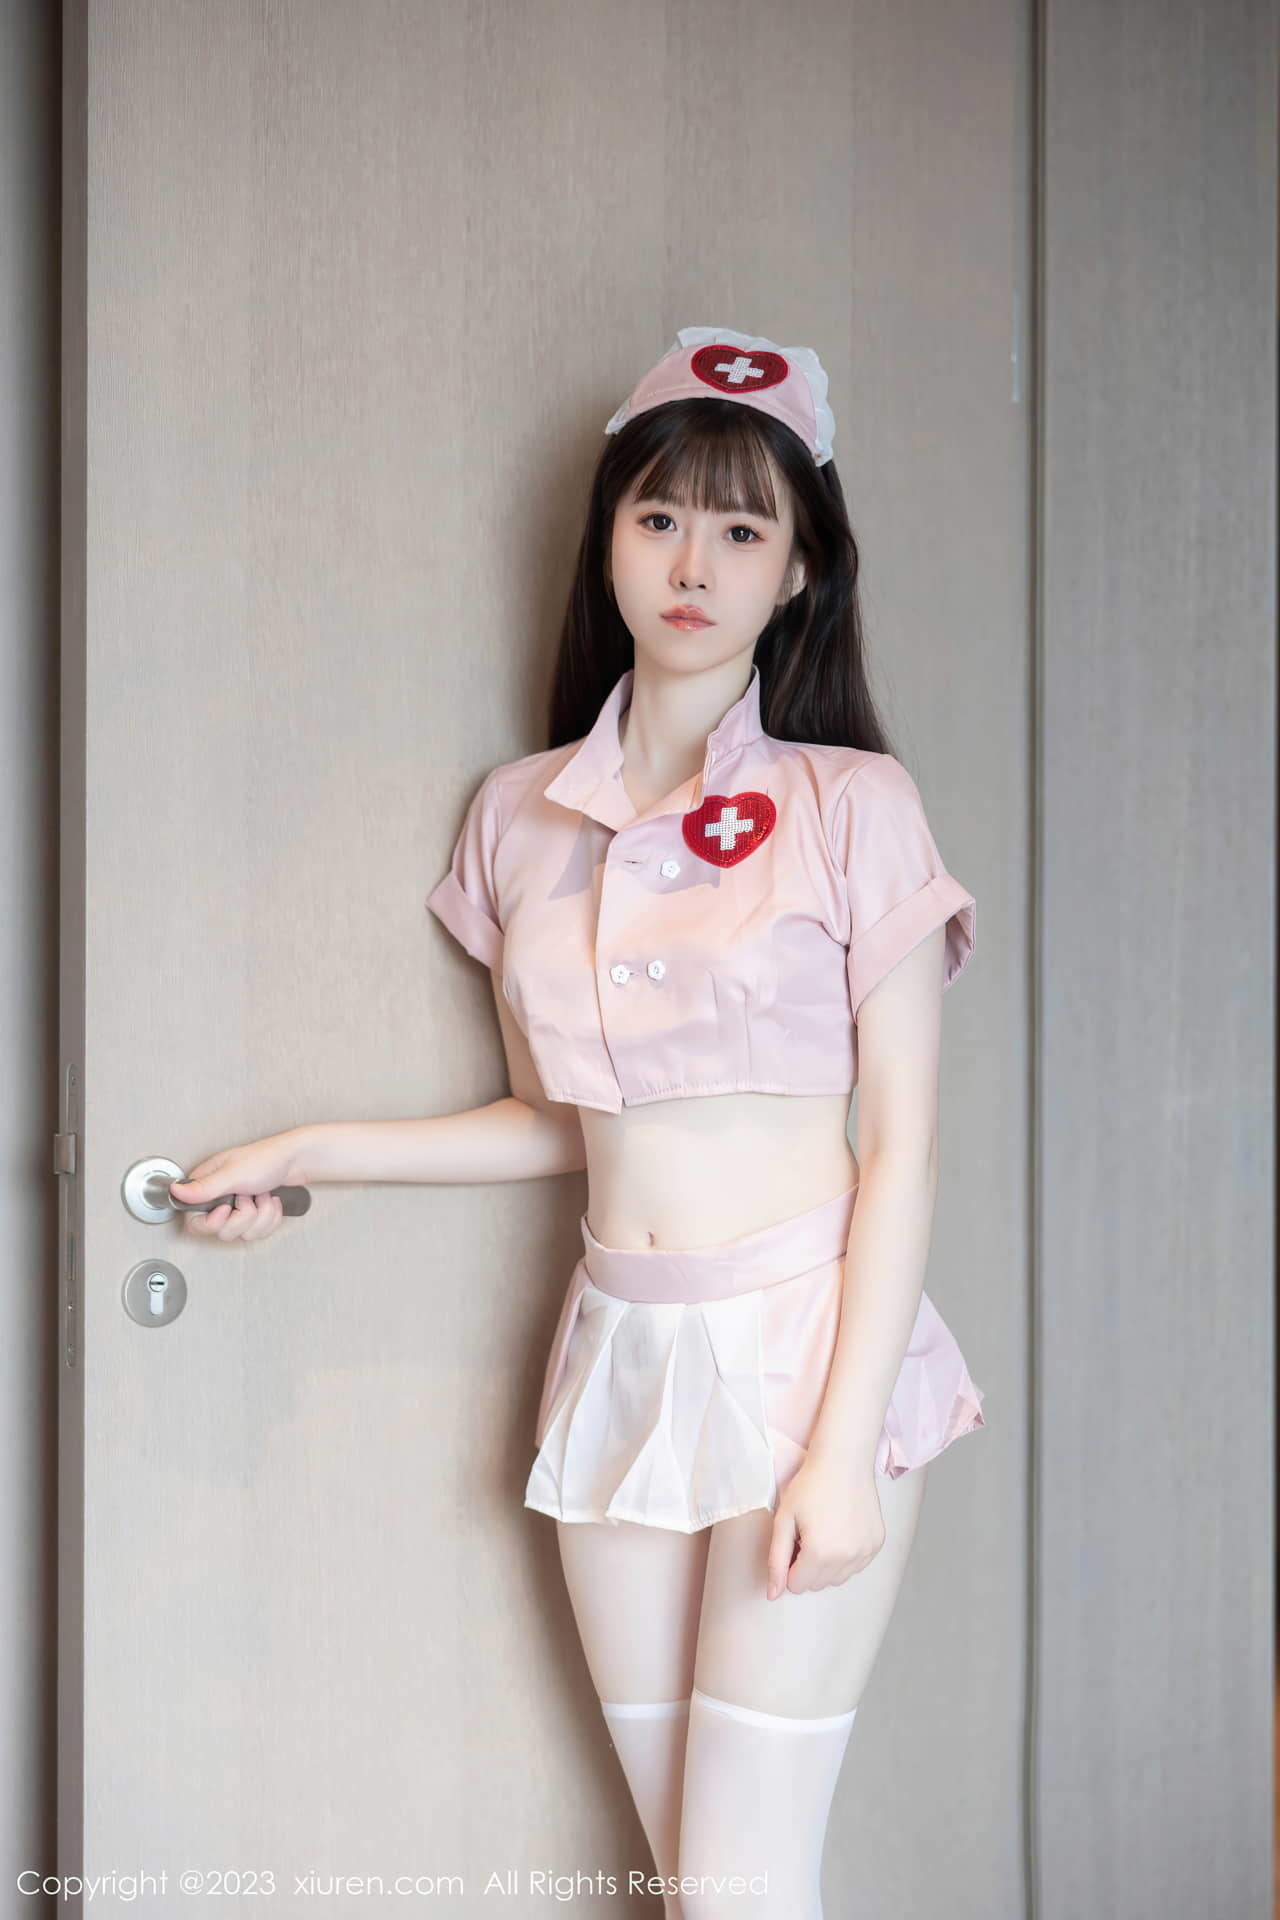 Newcomer Lin Youyou's sexy pink nurse uniform is charming and charming, her appearance is pure and sweet